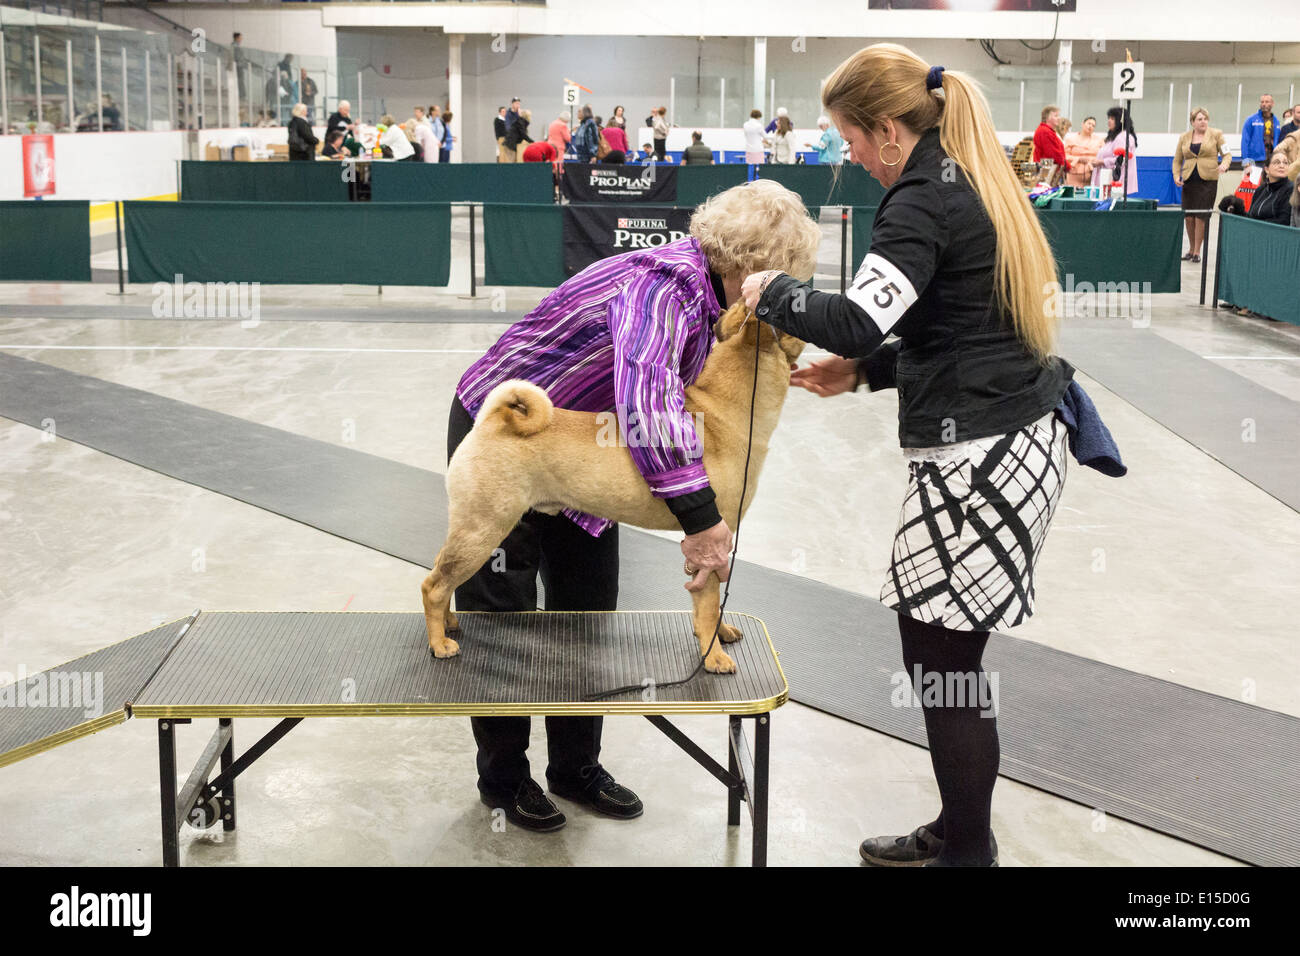 Shar Pei dog being judged at a dog show Stock Photo